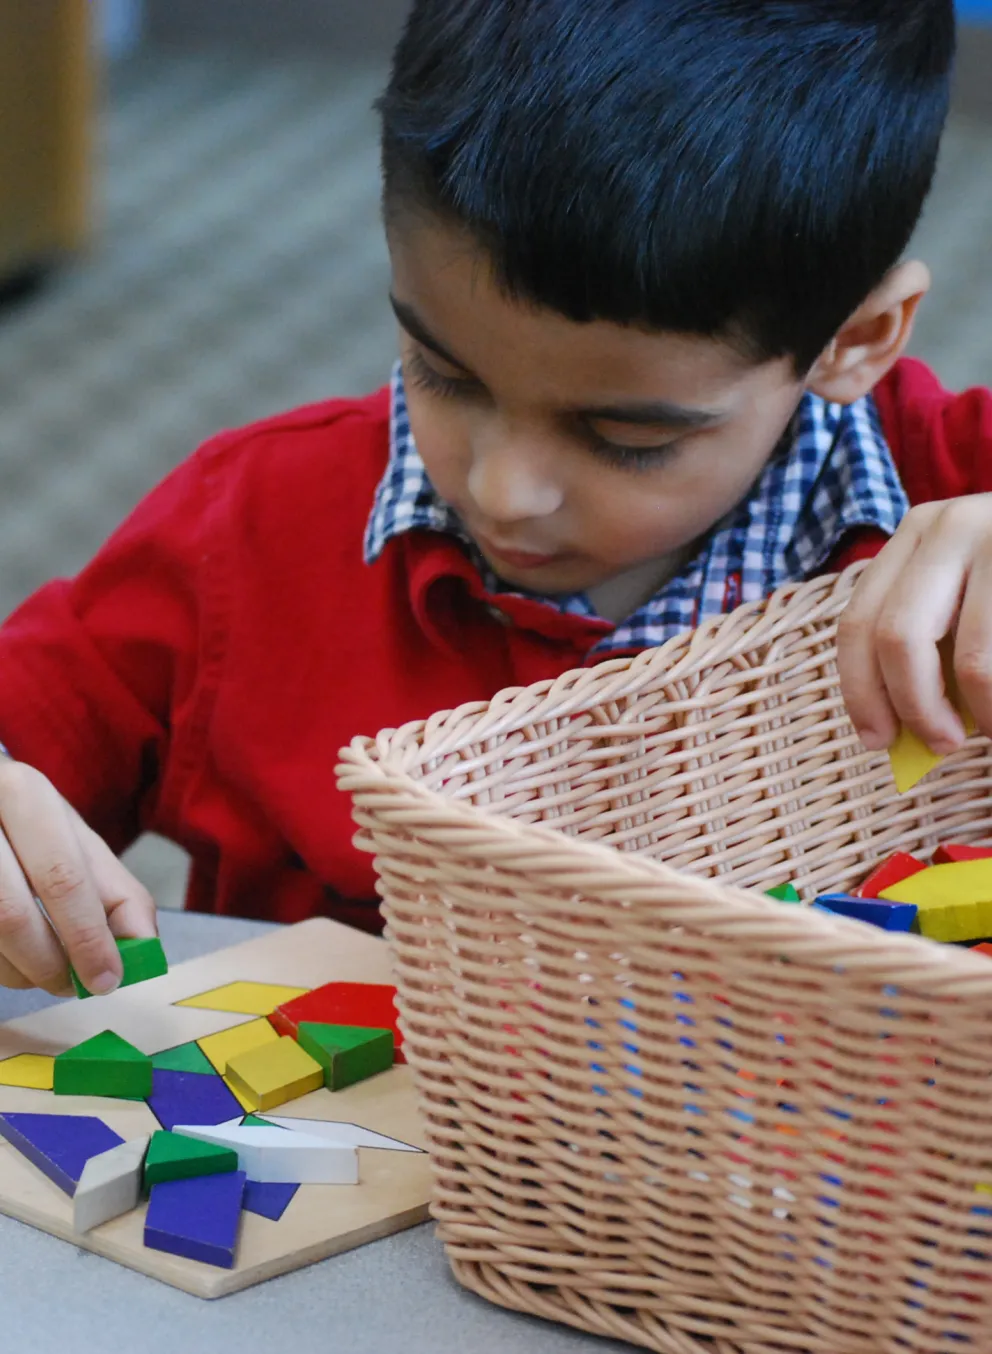 A preschool boy matches places colored blocks to match a pattern.